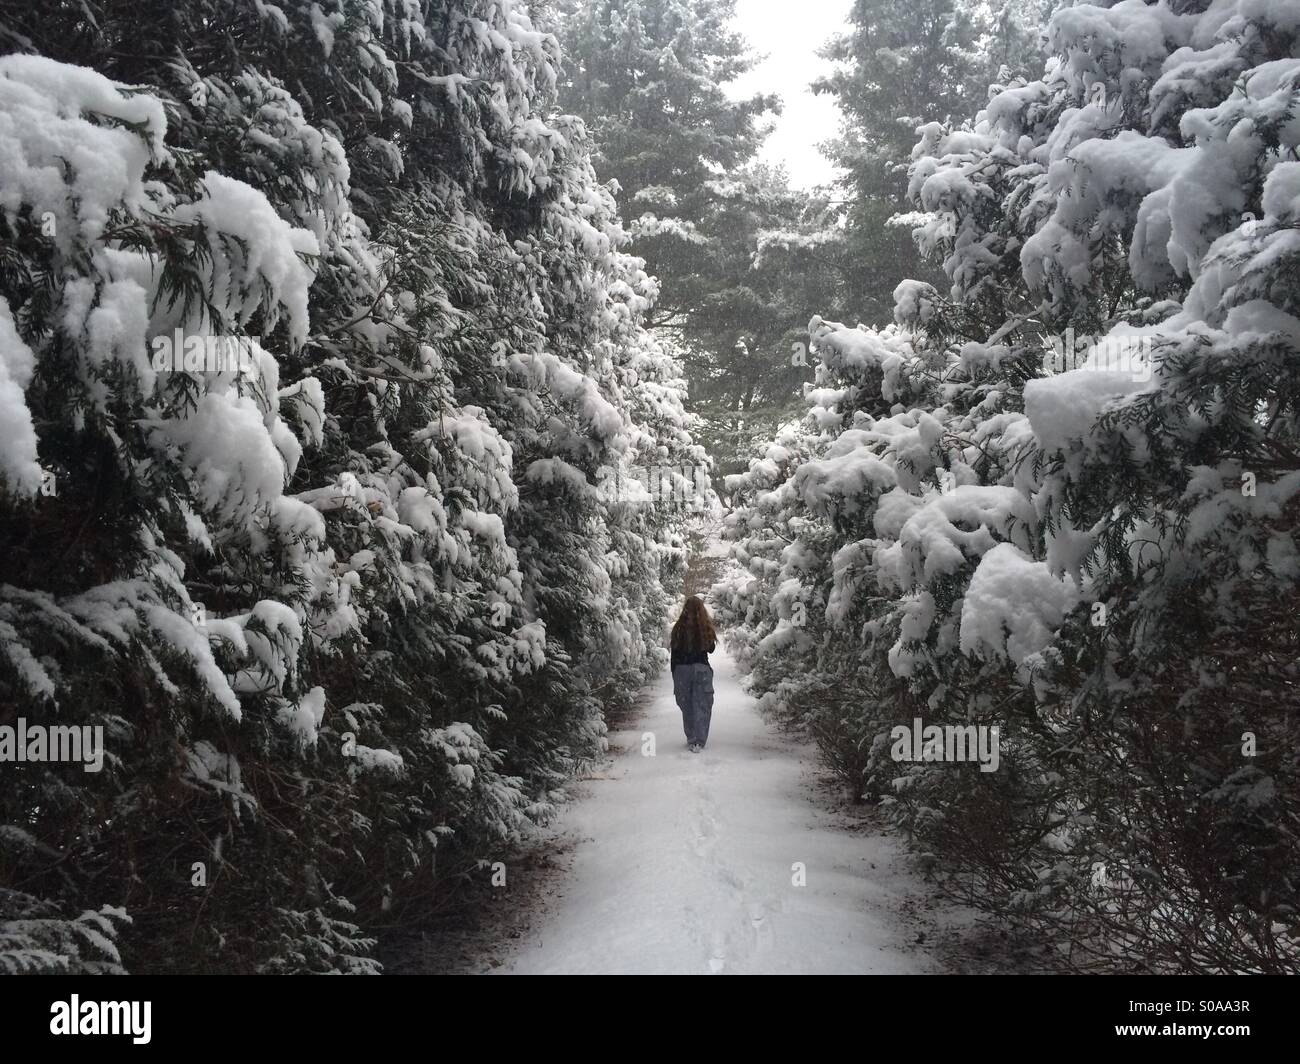 Walking a snowy path in the woods Stock Photo